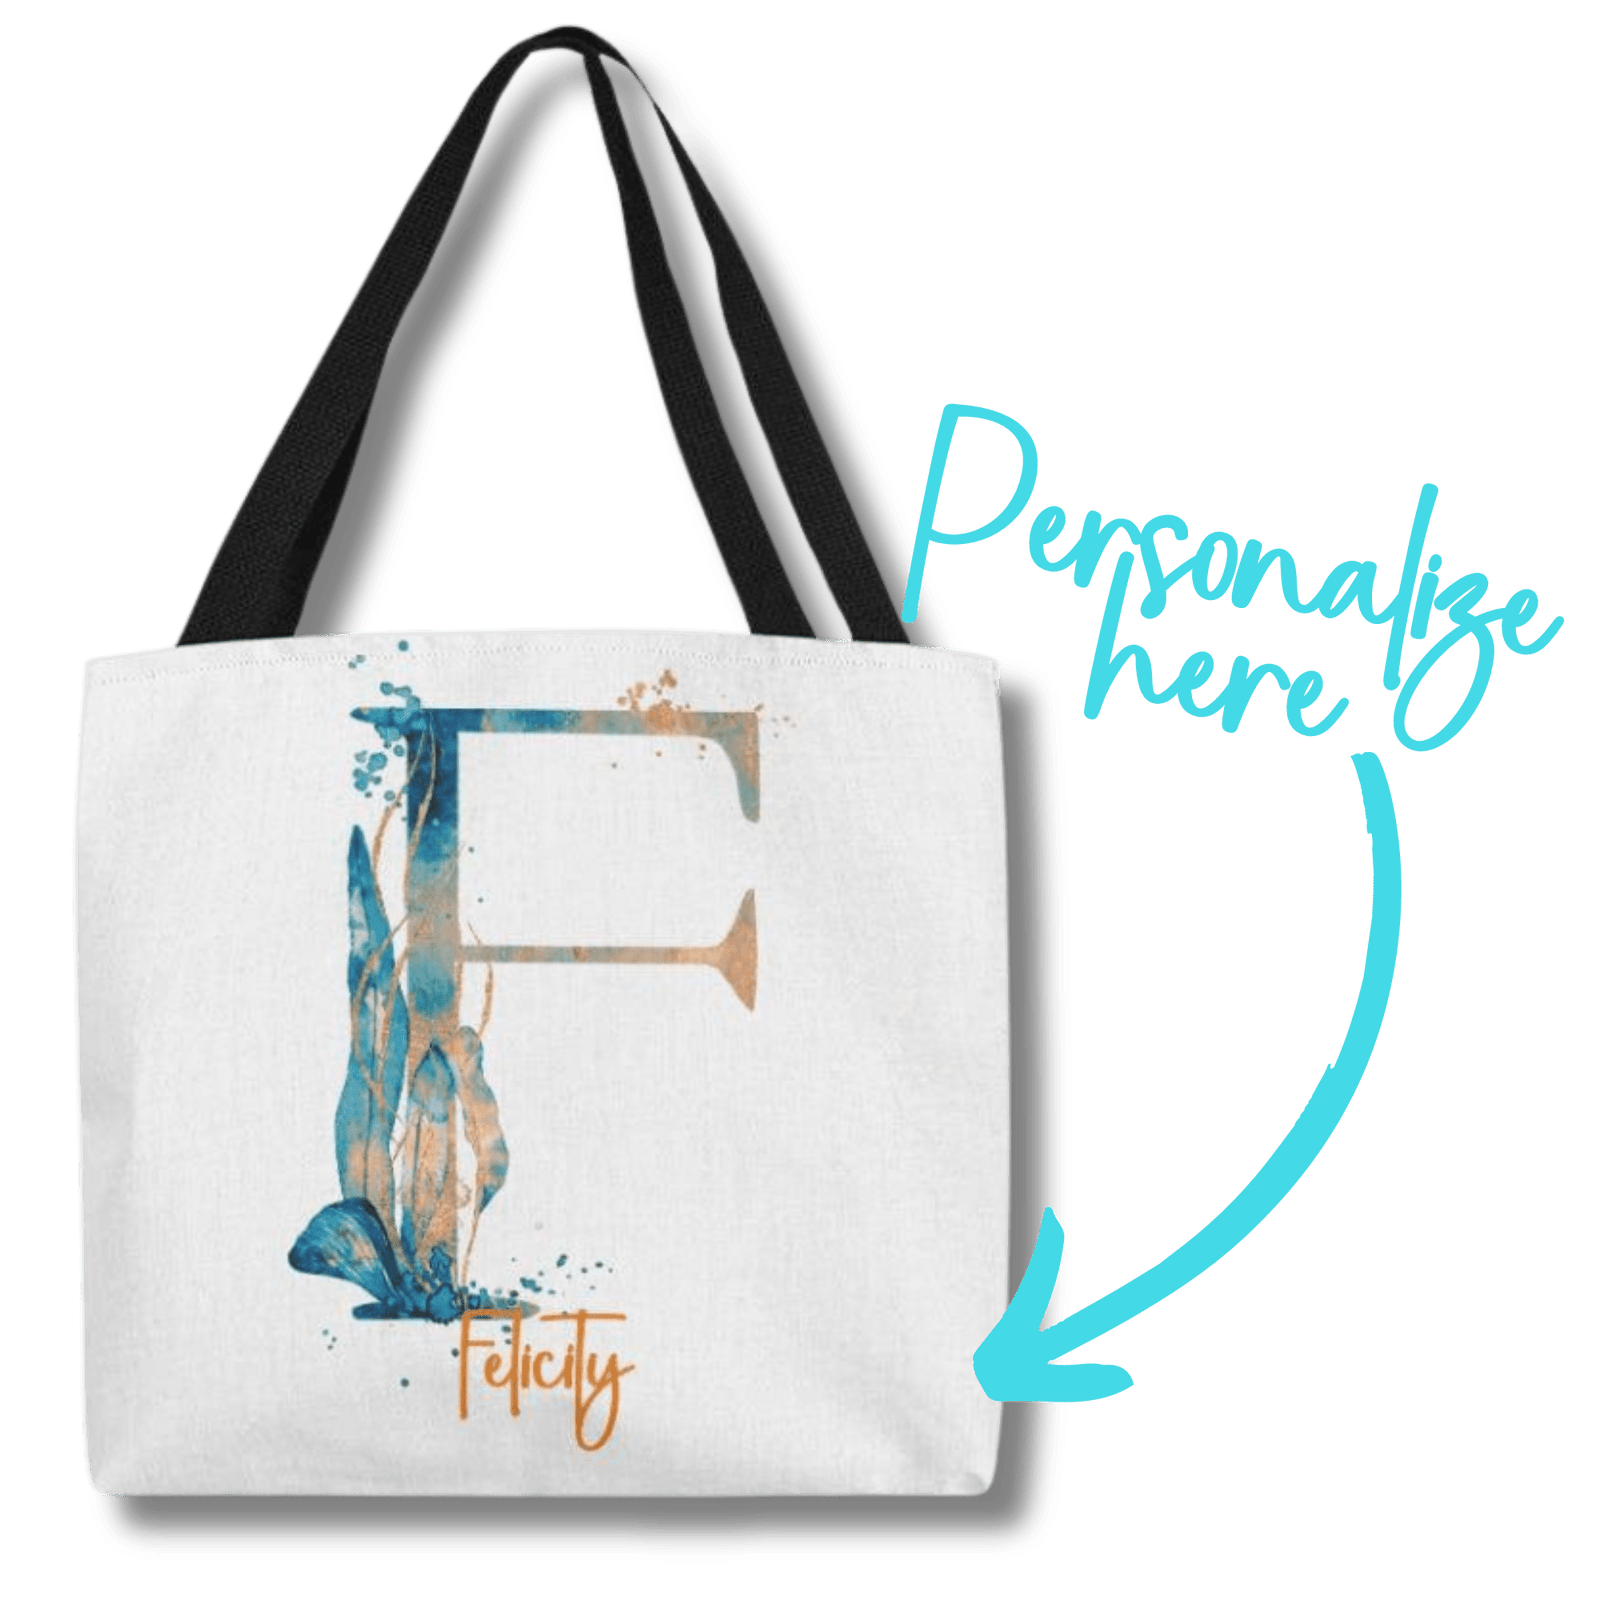 PERSONALIZABLE TOTE BAG | MONOGRAM - F | PERFECT GIFT for BFF, SISTER, CO-WORKER